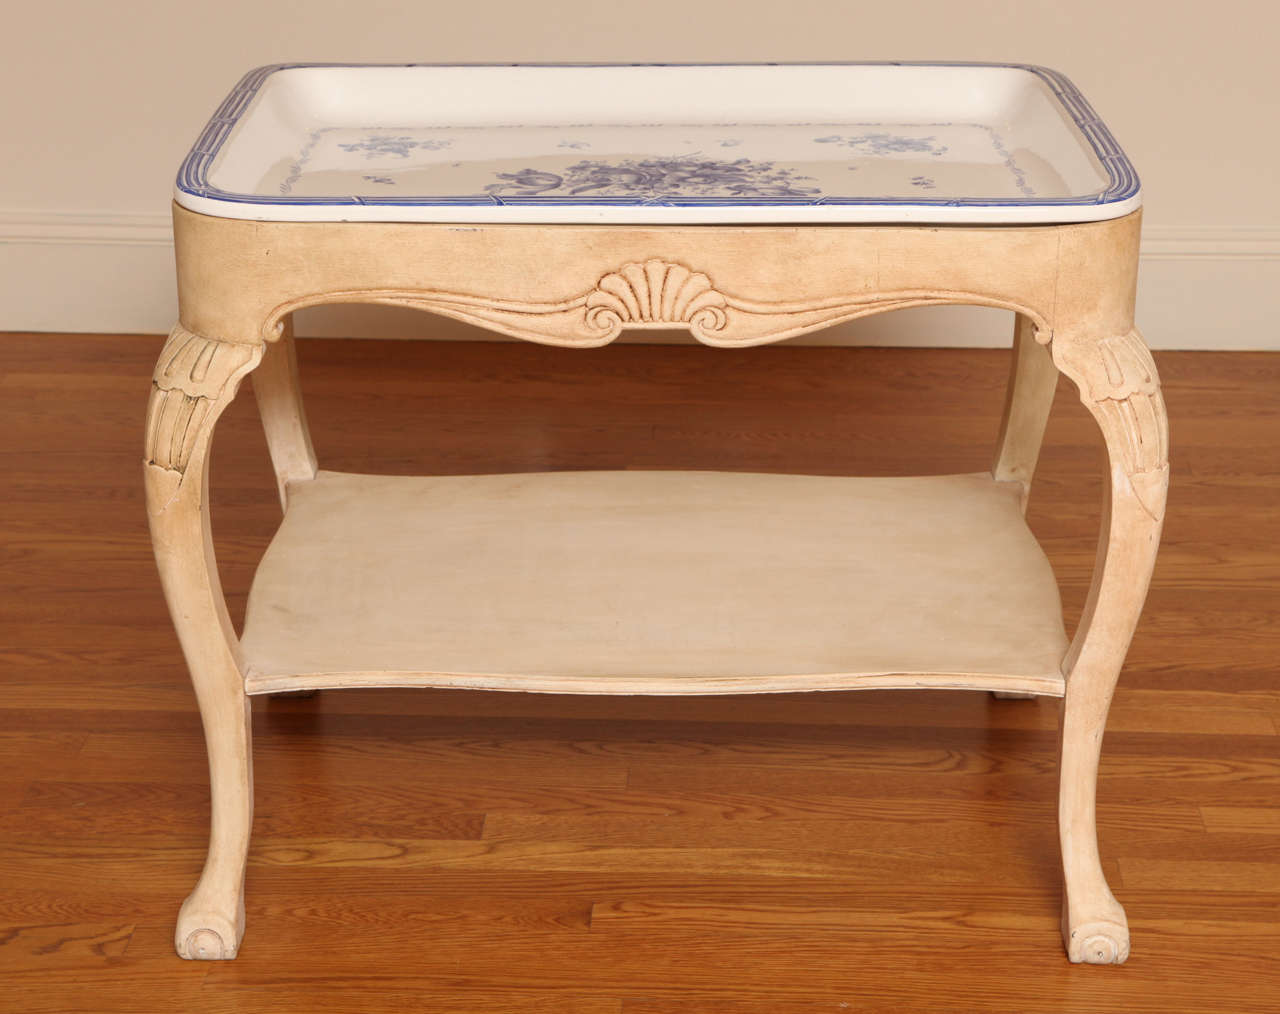 Stunning blue and white porcelain tray decorated with blowsy floral sprays, signed Rörstrand, Sweden's oldest porcelain manufacturers and dated 1924, set into a cream-painted table carved with shell decoration and raised on cabriole legs with a